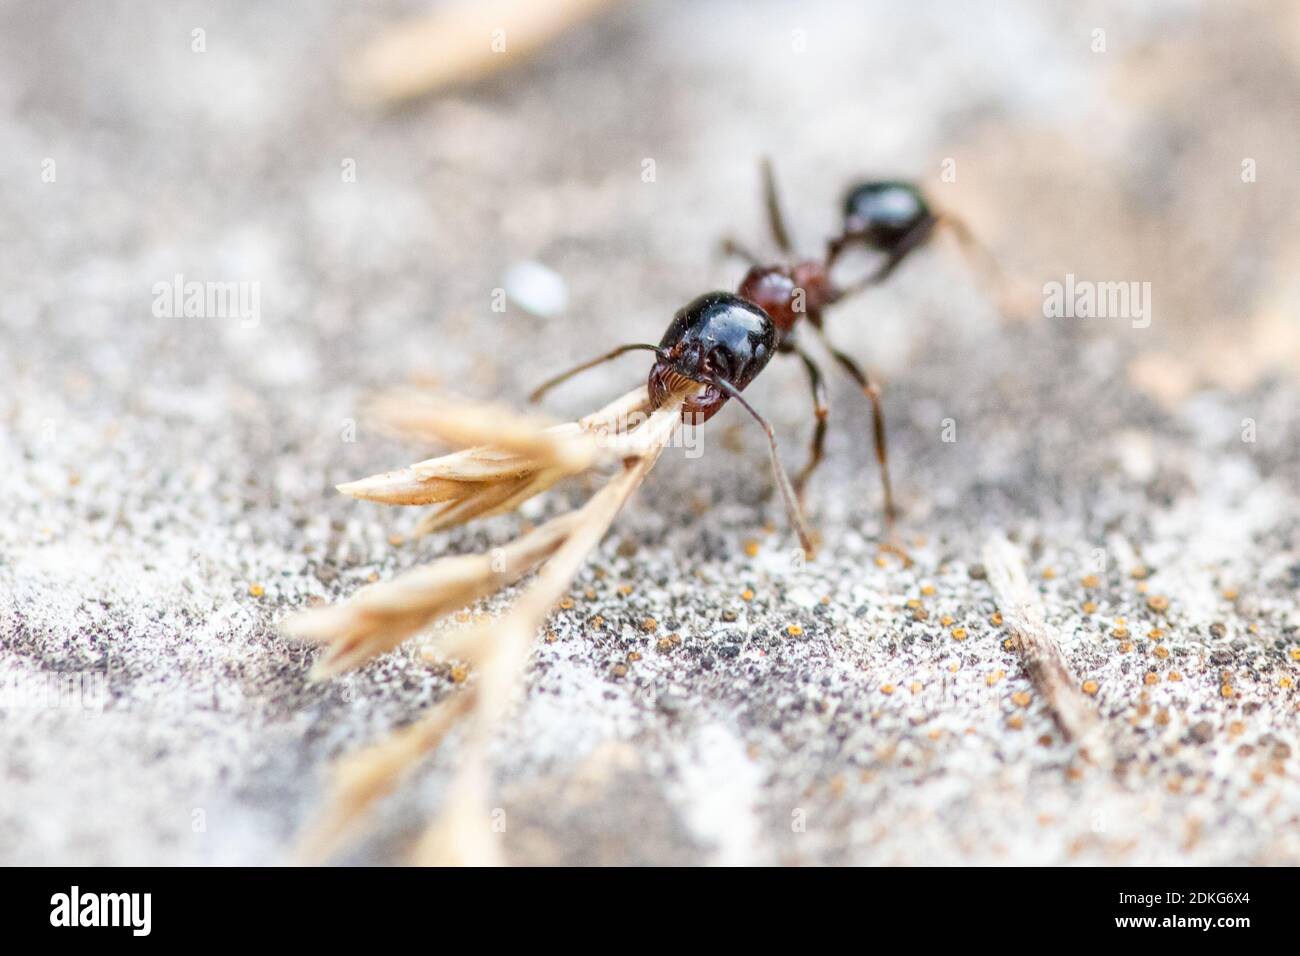 An ant carrying straw. Stock Photo